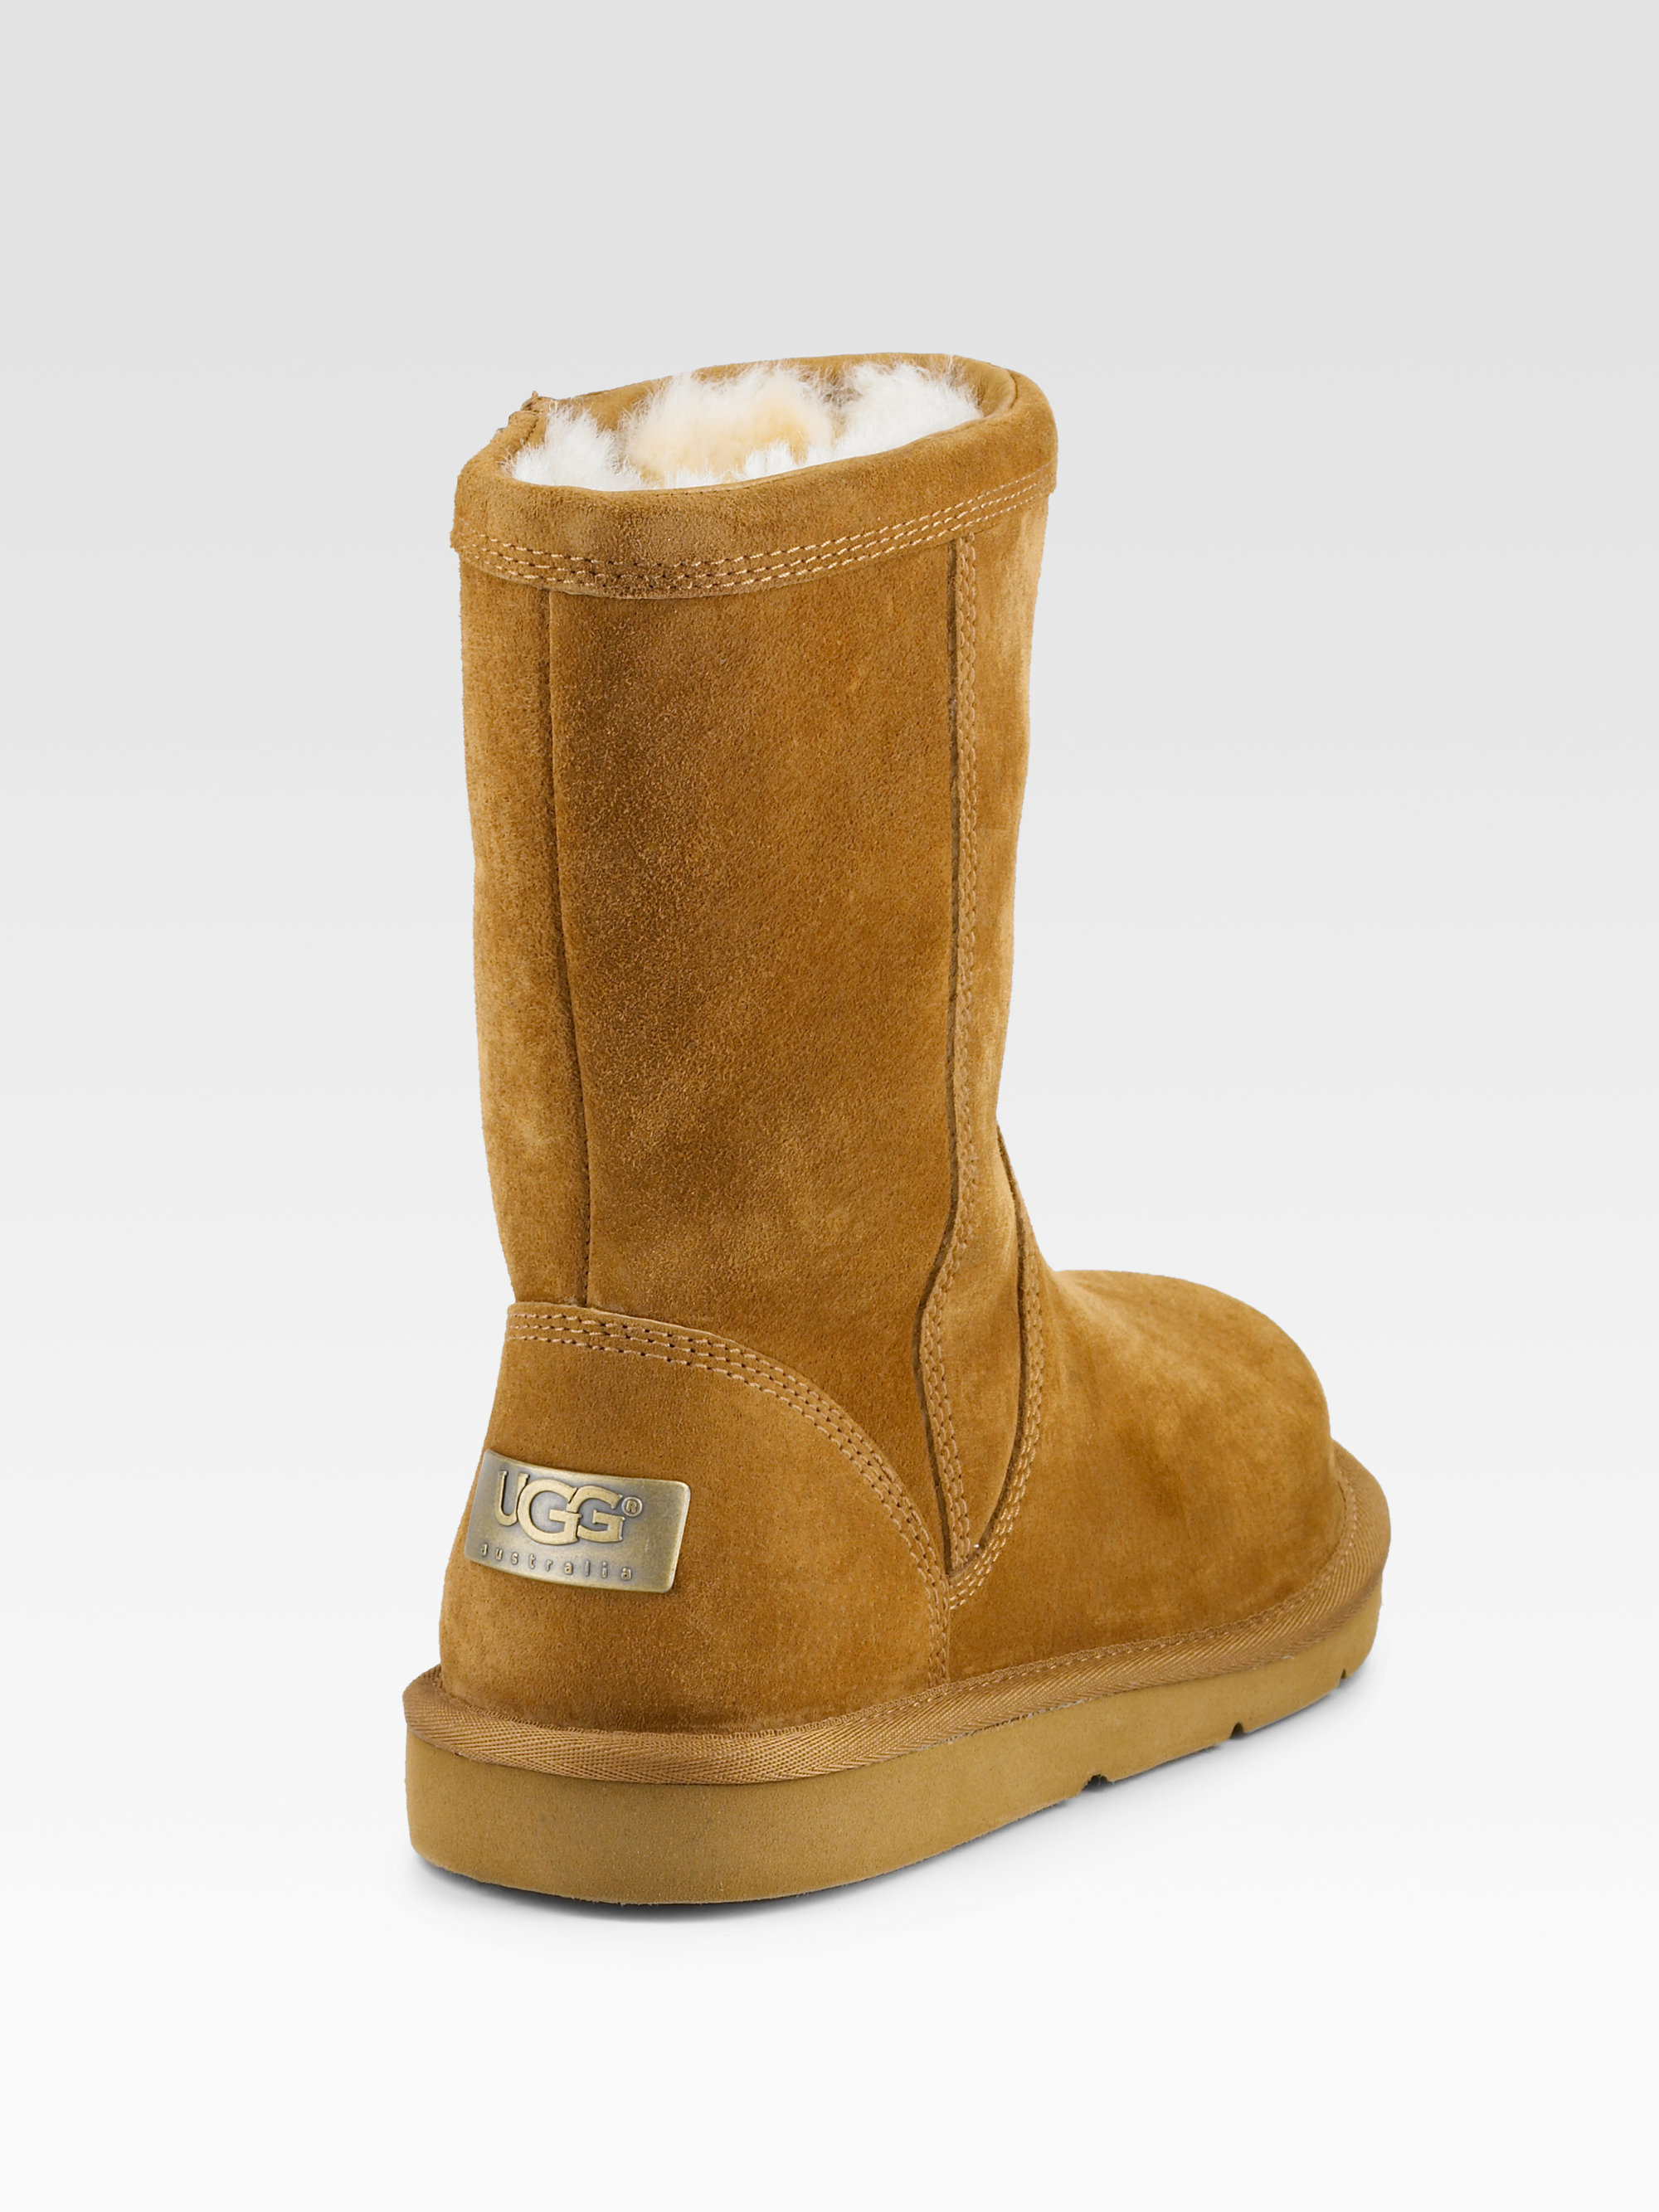 ugg boots with zipper on the side